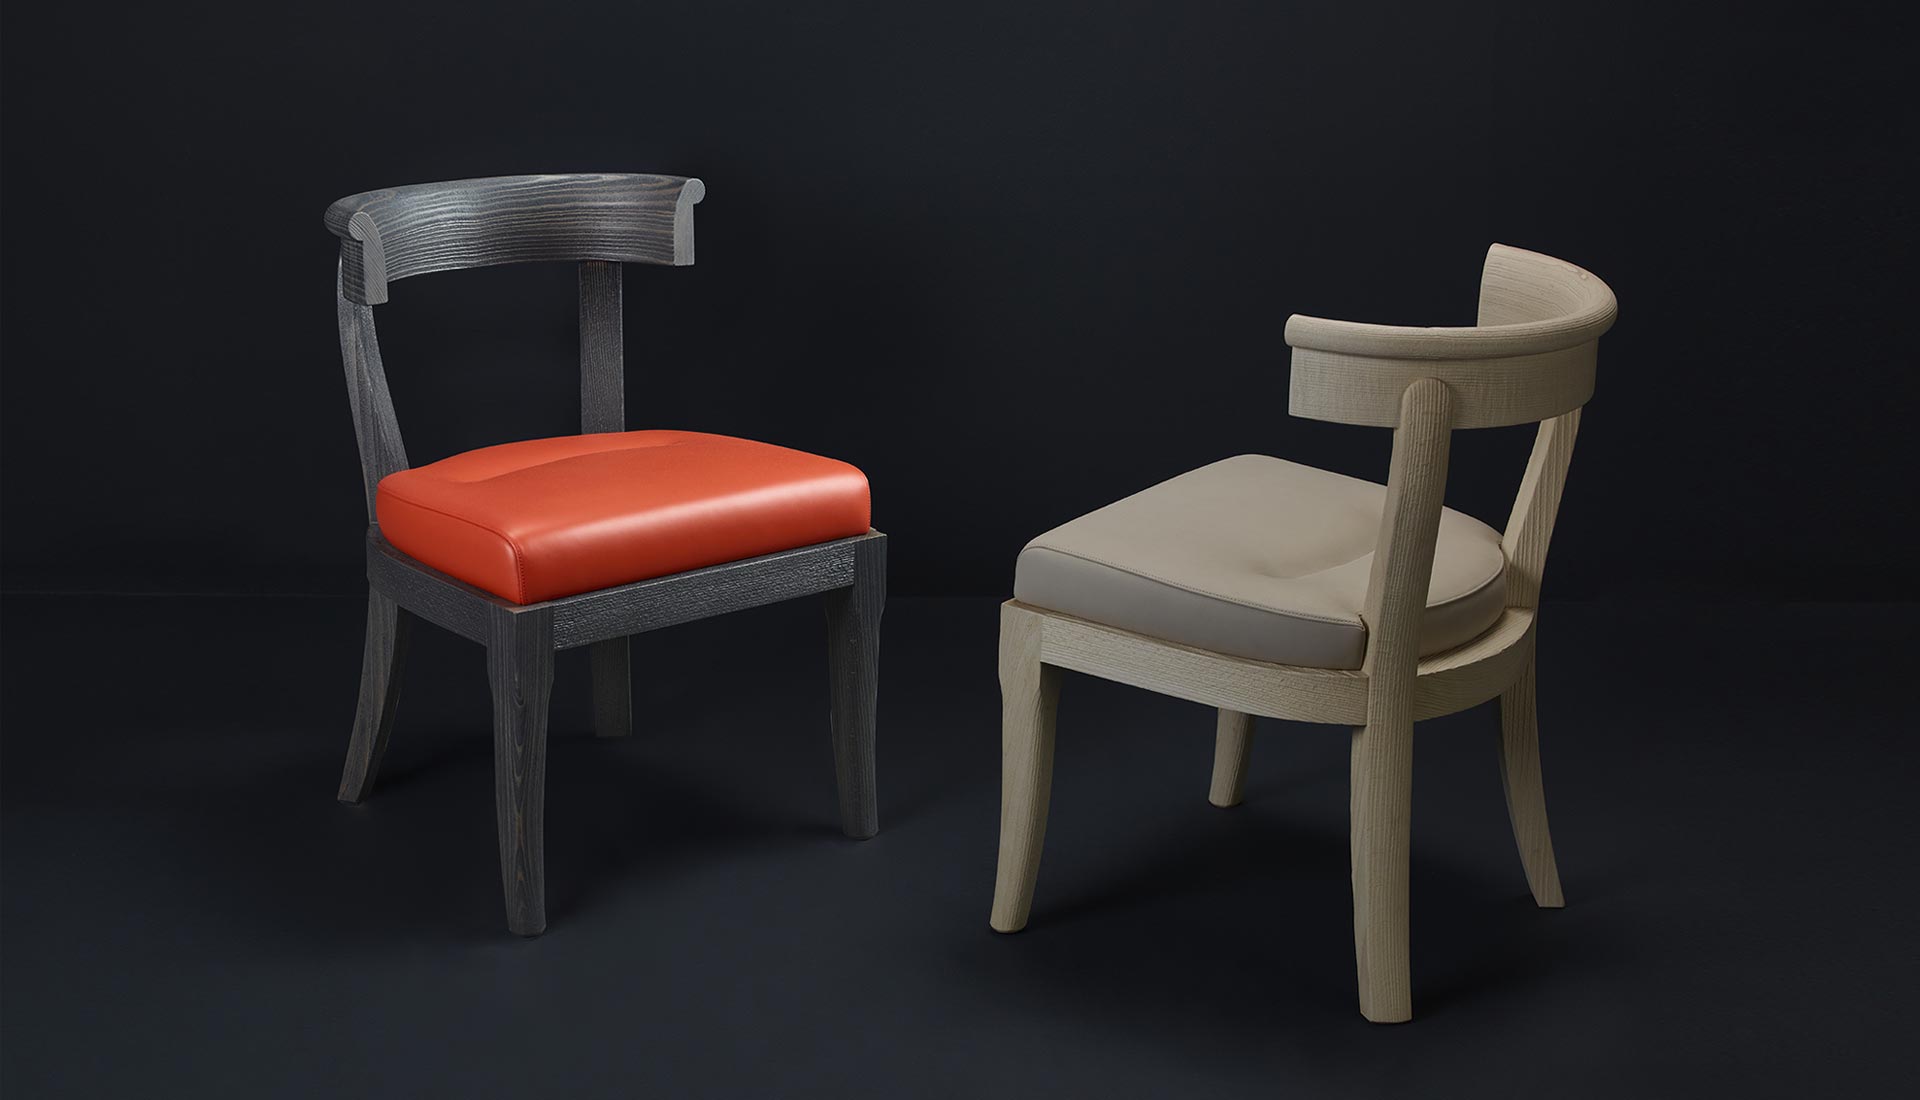 Irene is a wooden dining chair with a semi-circle backrest, from Promemoria's catalogue | Promemoria